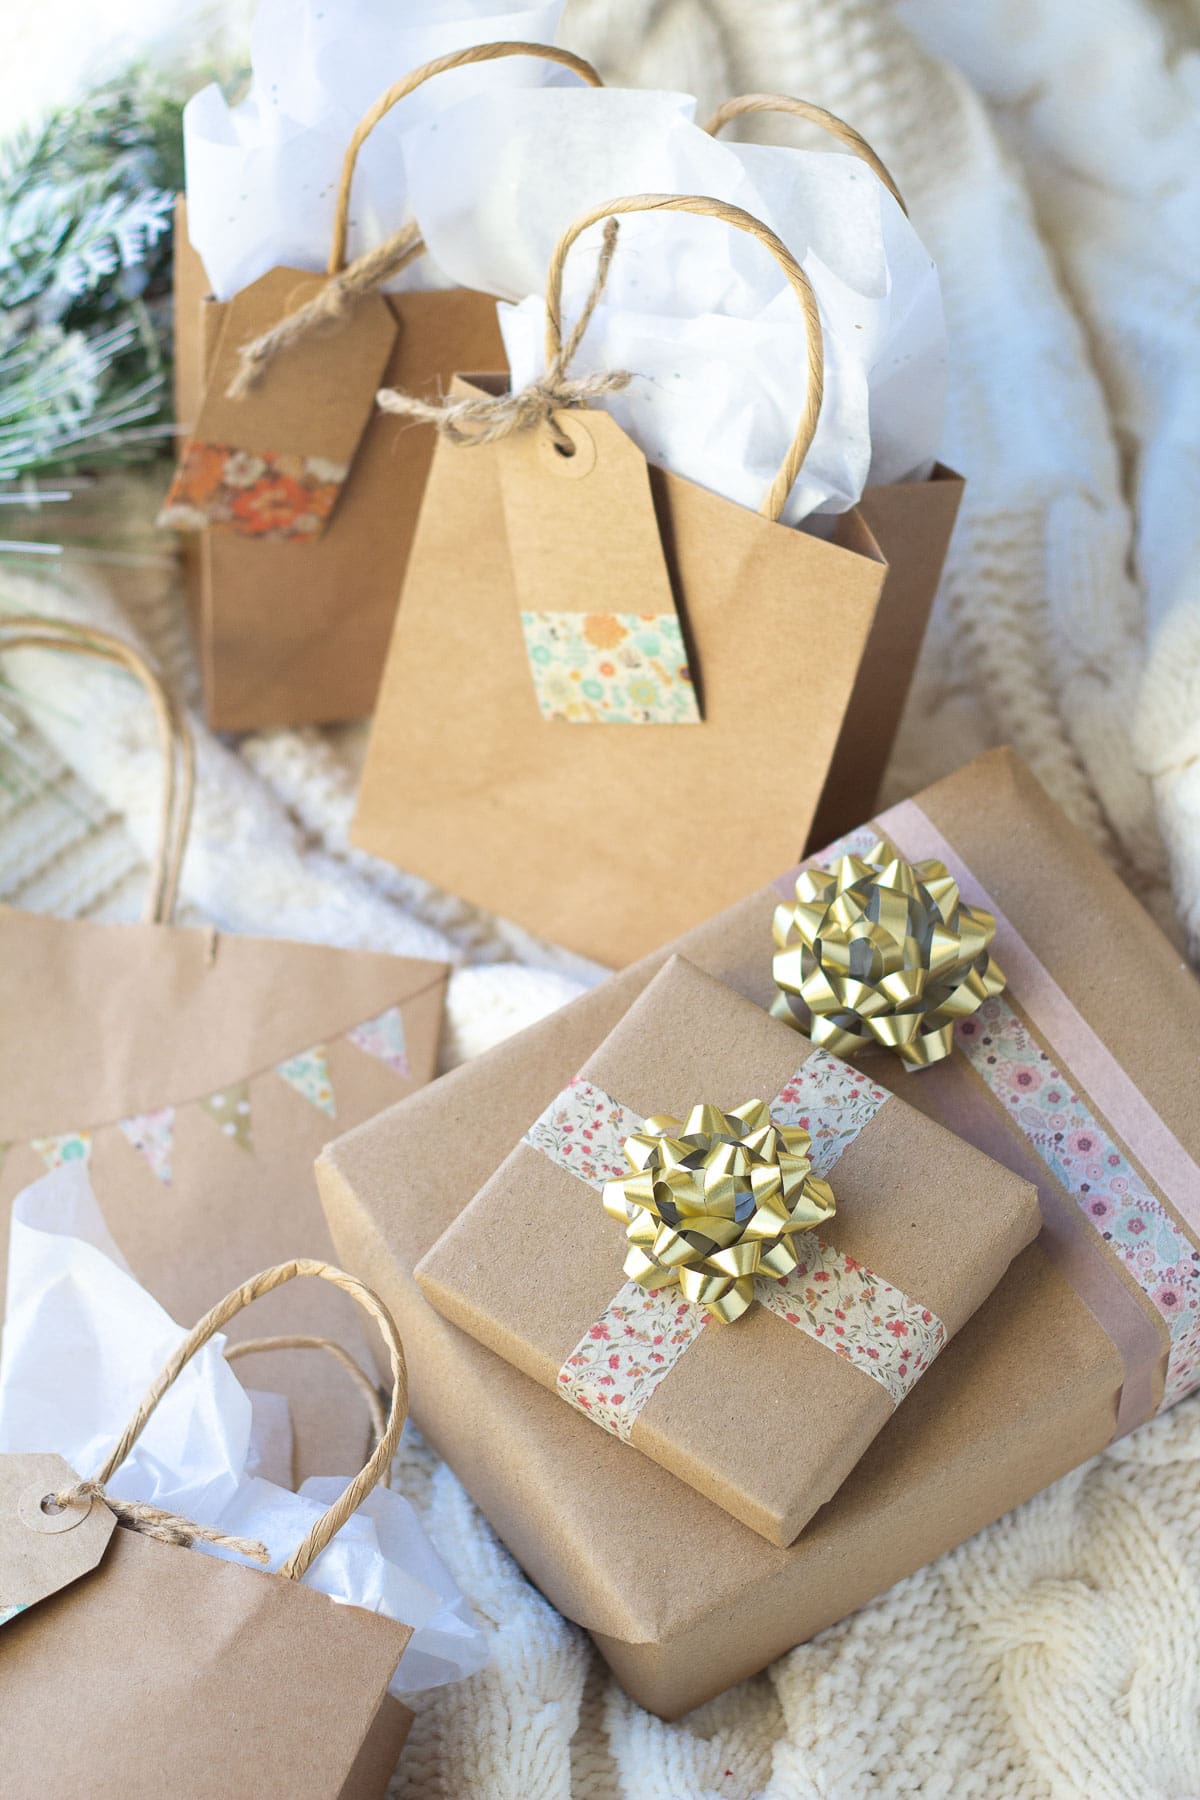 Washi tape wrapped gifts with decorative bows on the gift boxes.